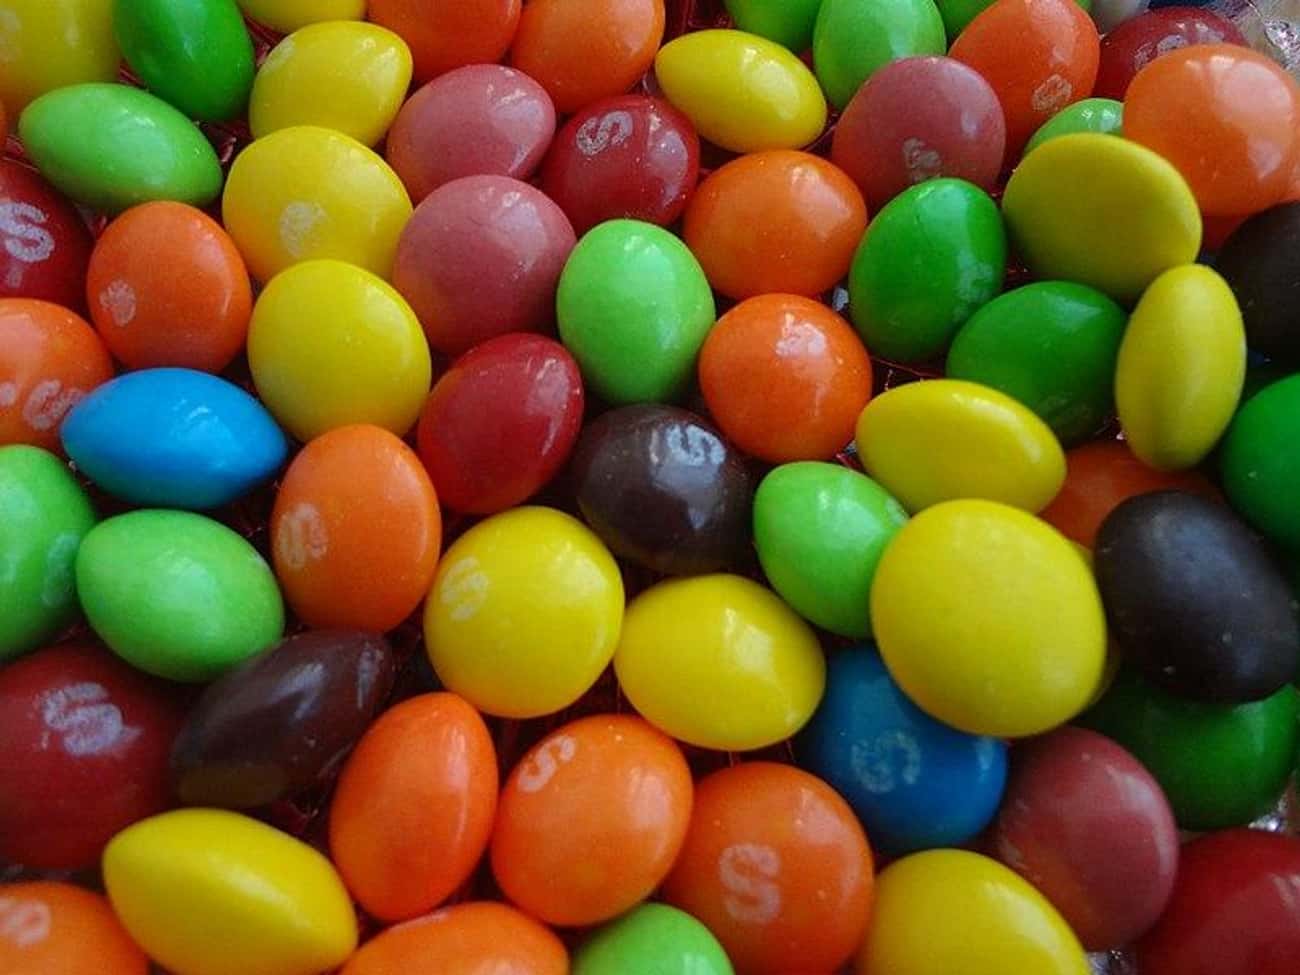 Skittles Have An Additive That Can Damage DNA